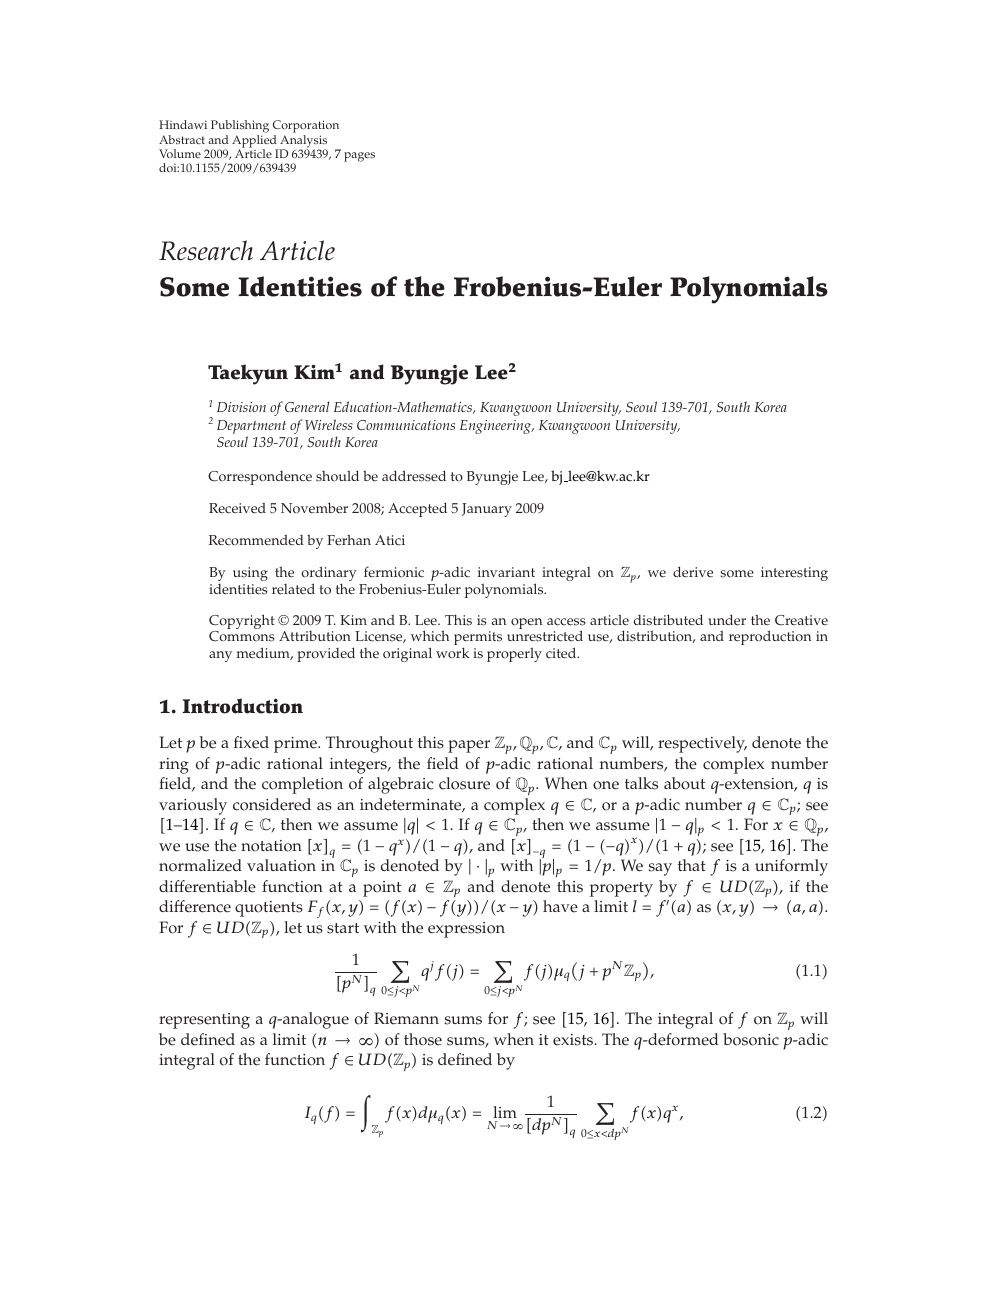 Some Identities Of The Frobenius Euler Polynomials Topic Of Research Paper In Mathematics Download Scholarly Article Pdf And Read For Free On Cyberleninka Open Science Hub